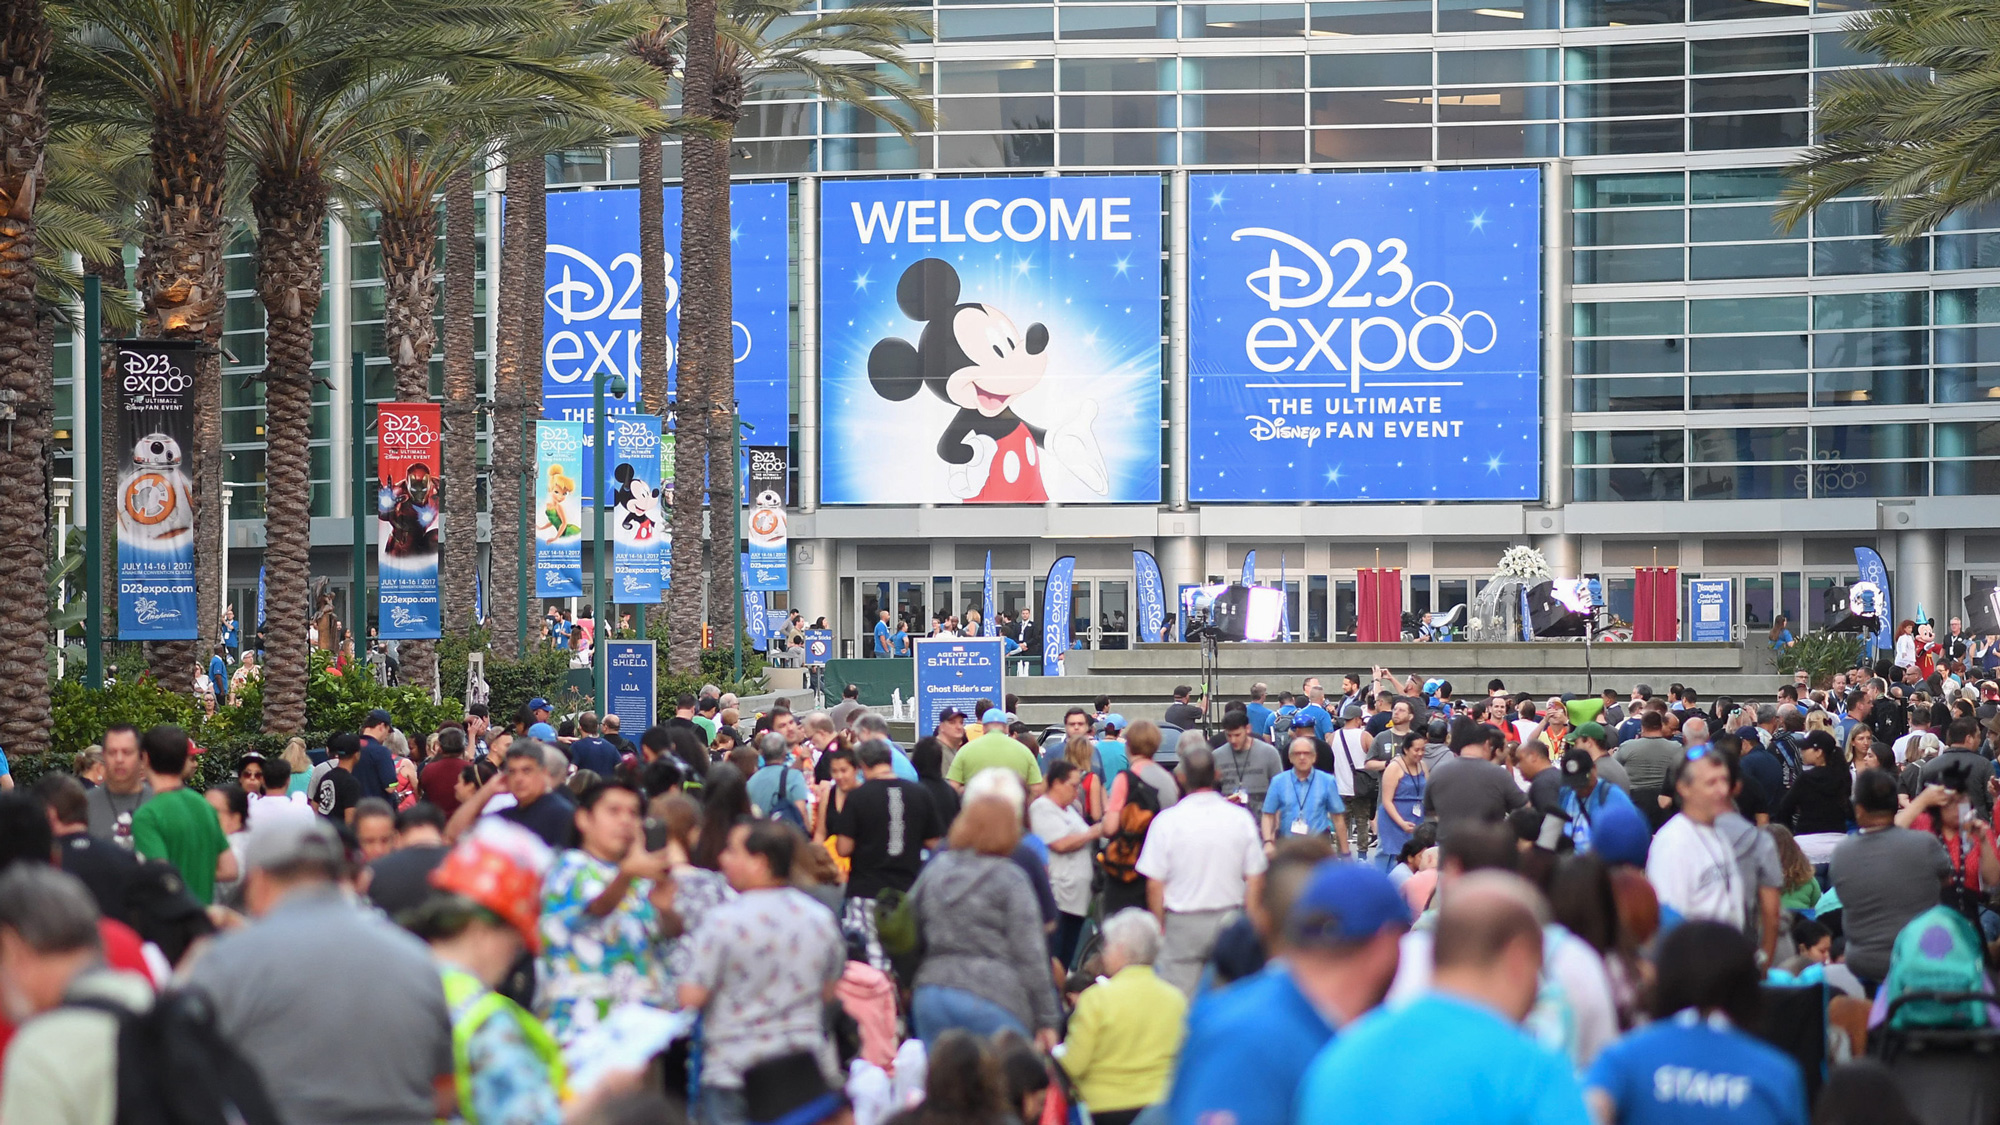 Disney D23 Expo 19 Schedule Dates And The Latest Marvel And Star Wars News Tom S Guide